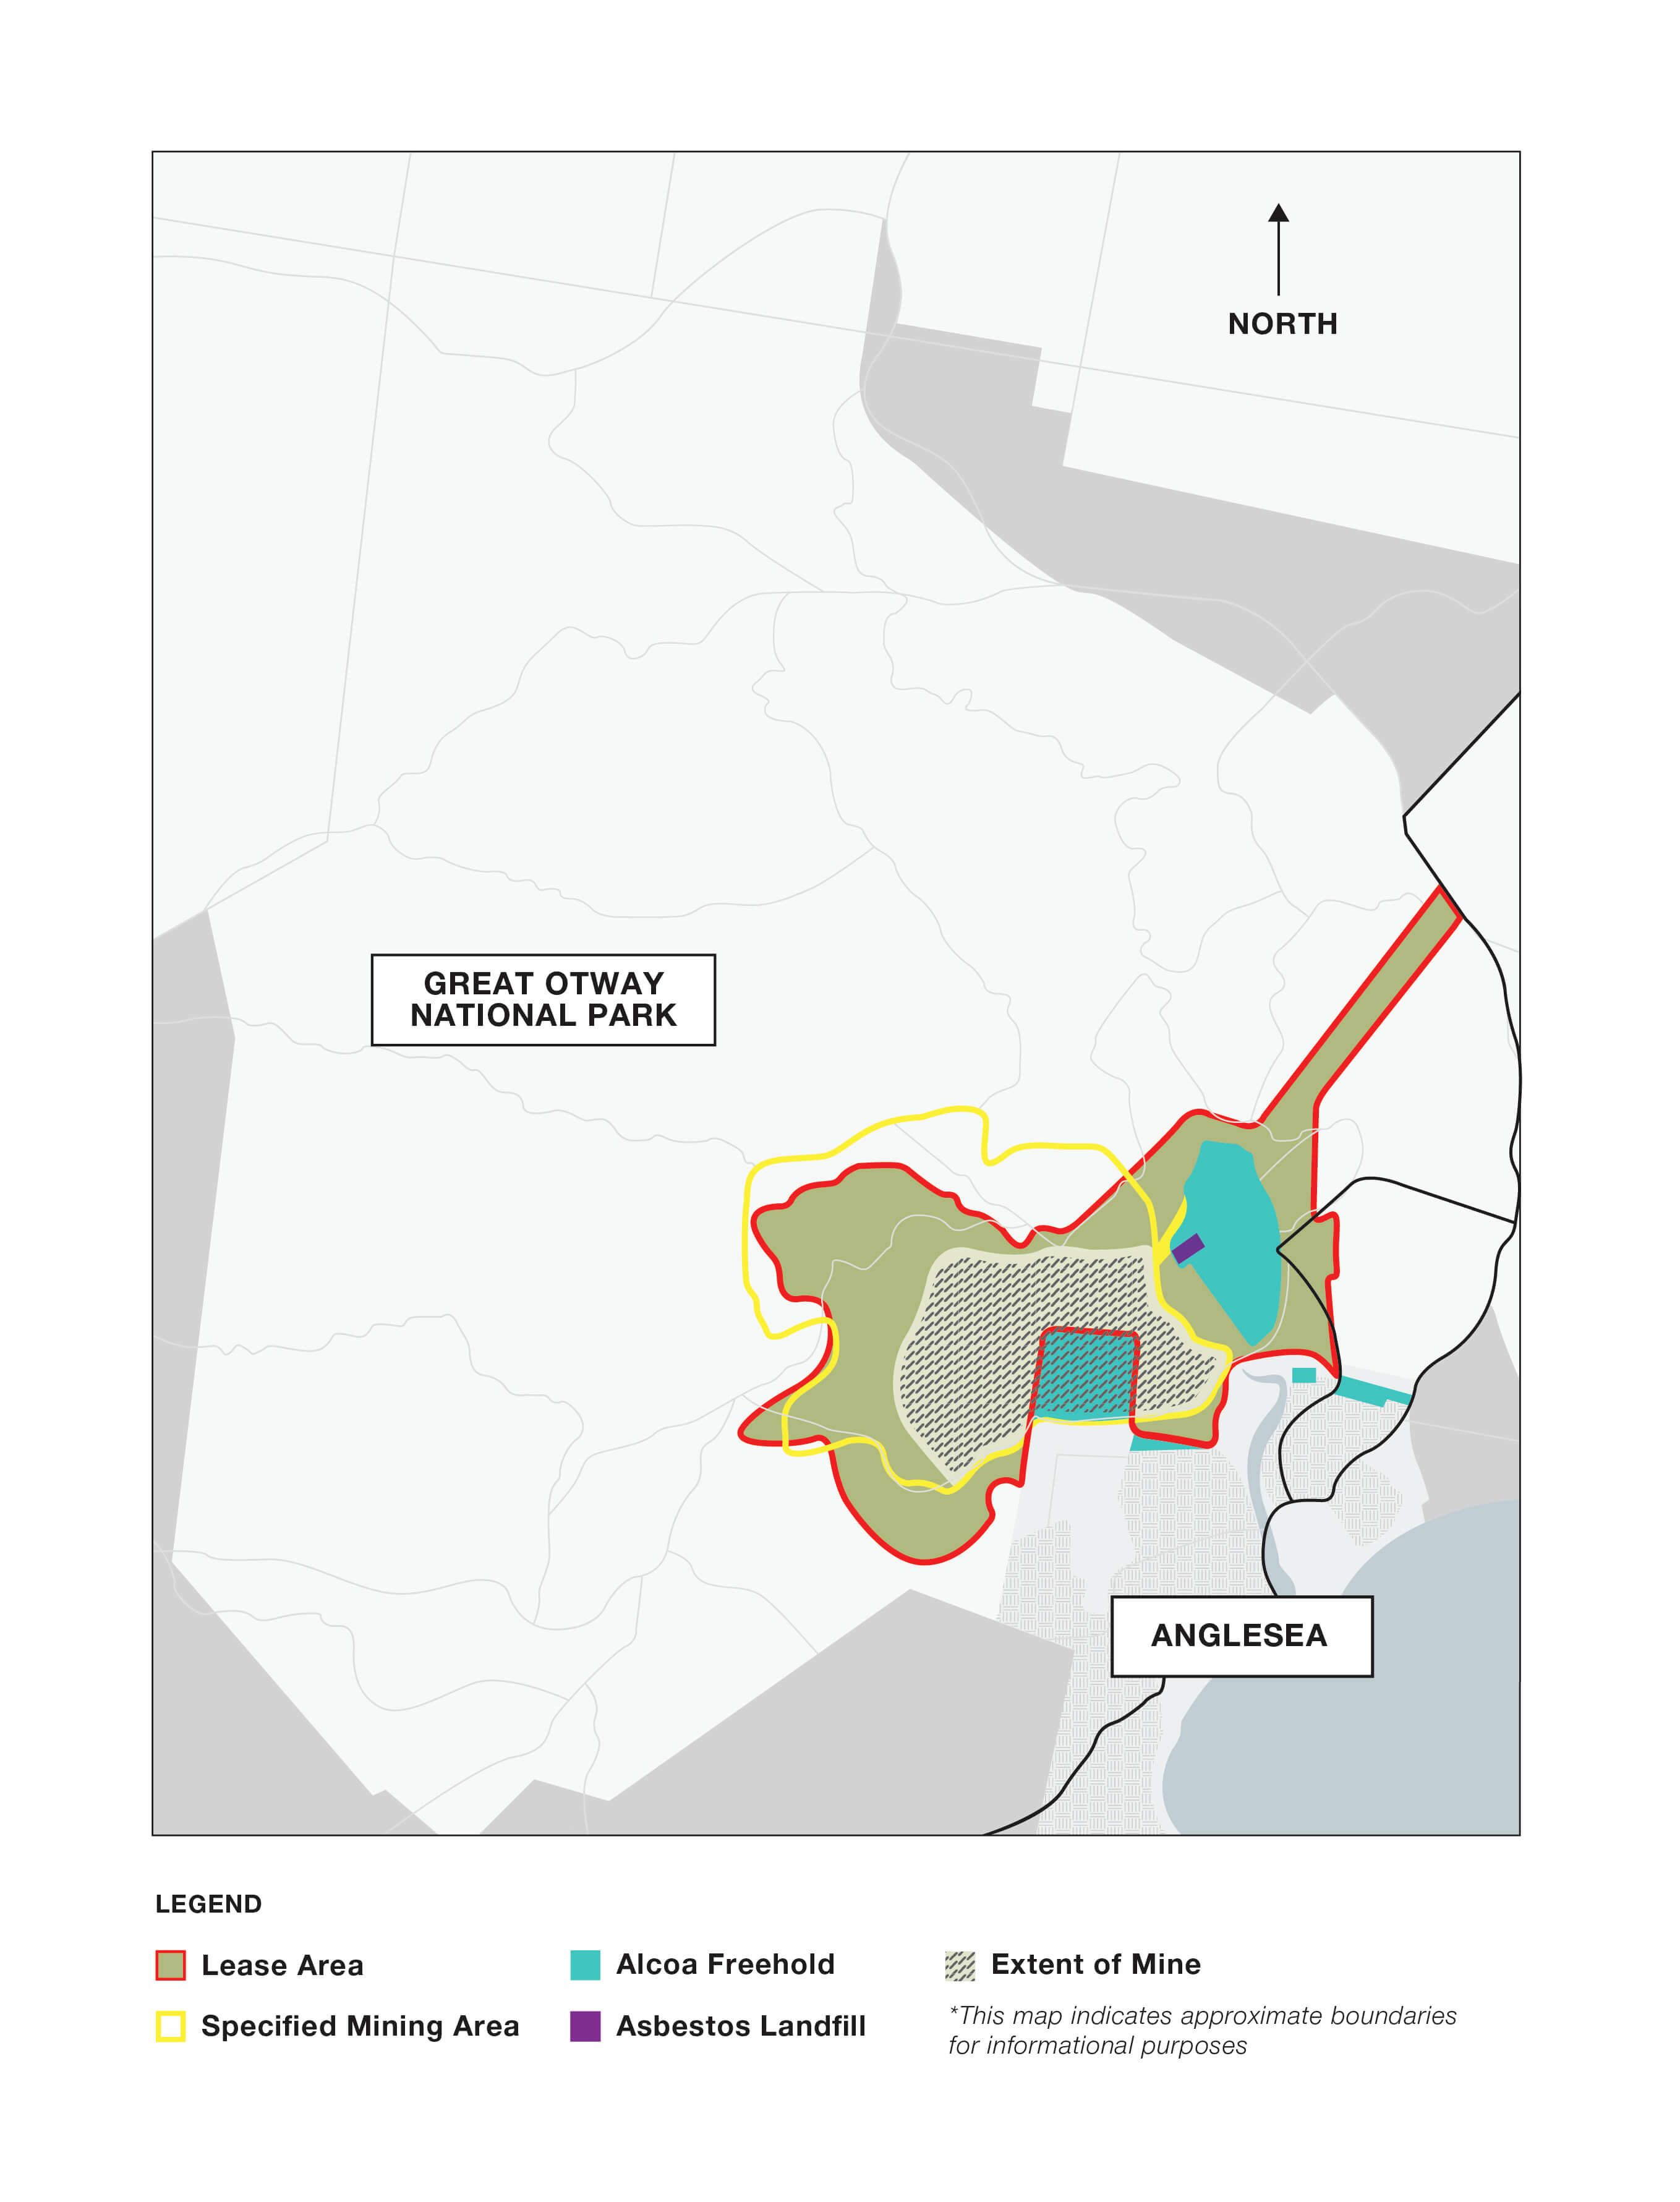 Map of the Anglesea area, including Great Otway National Park. The map highlights where Alcoa’s lease area is as well as the specified mining area and the freehold and asbestos landfill within.